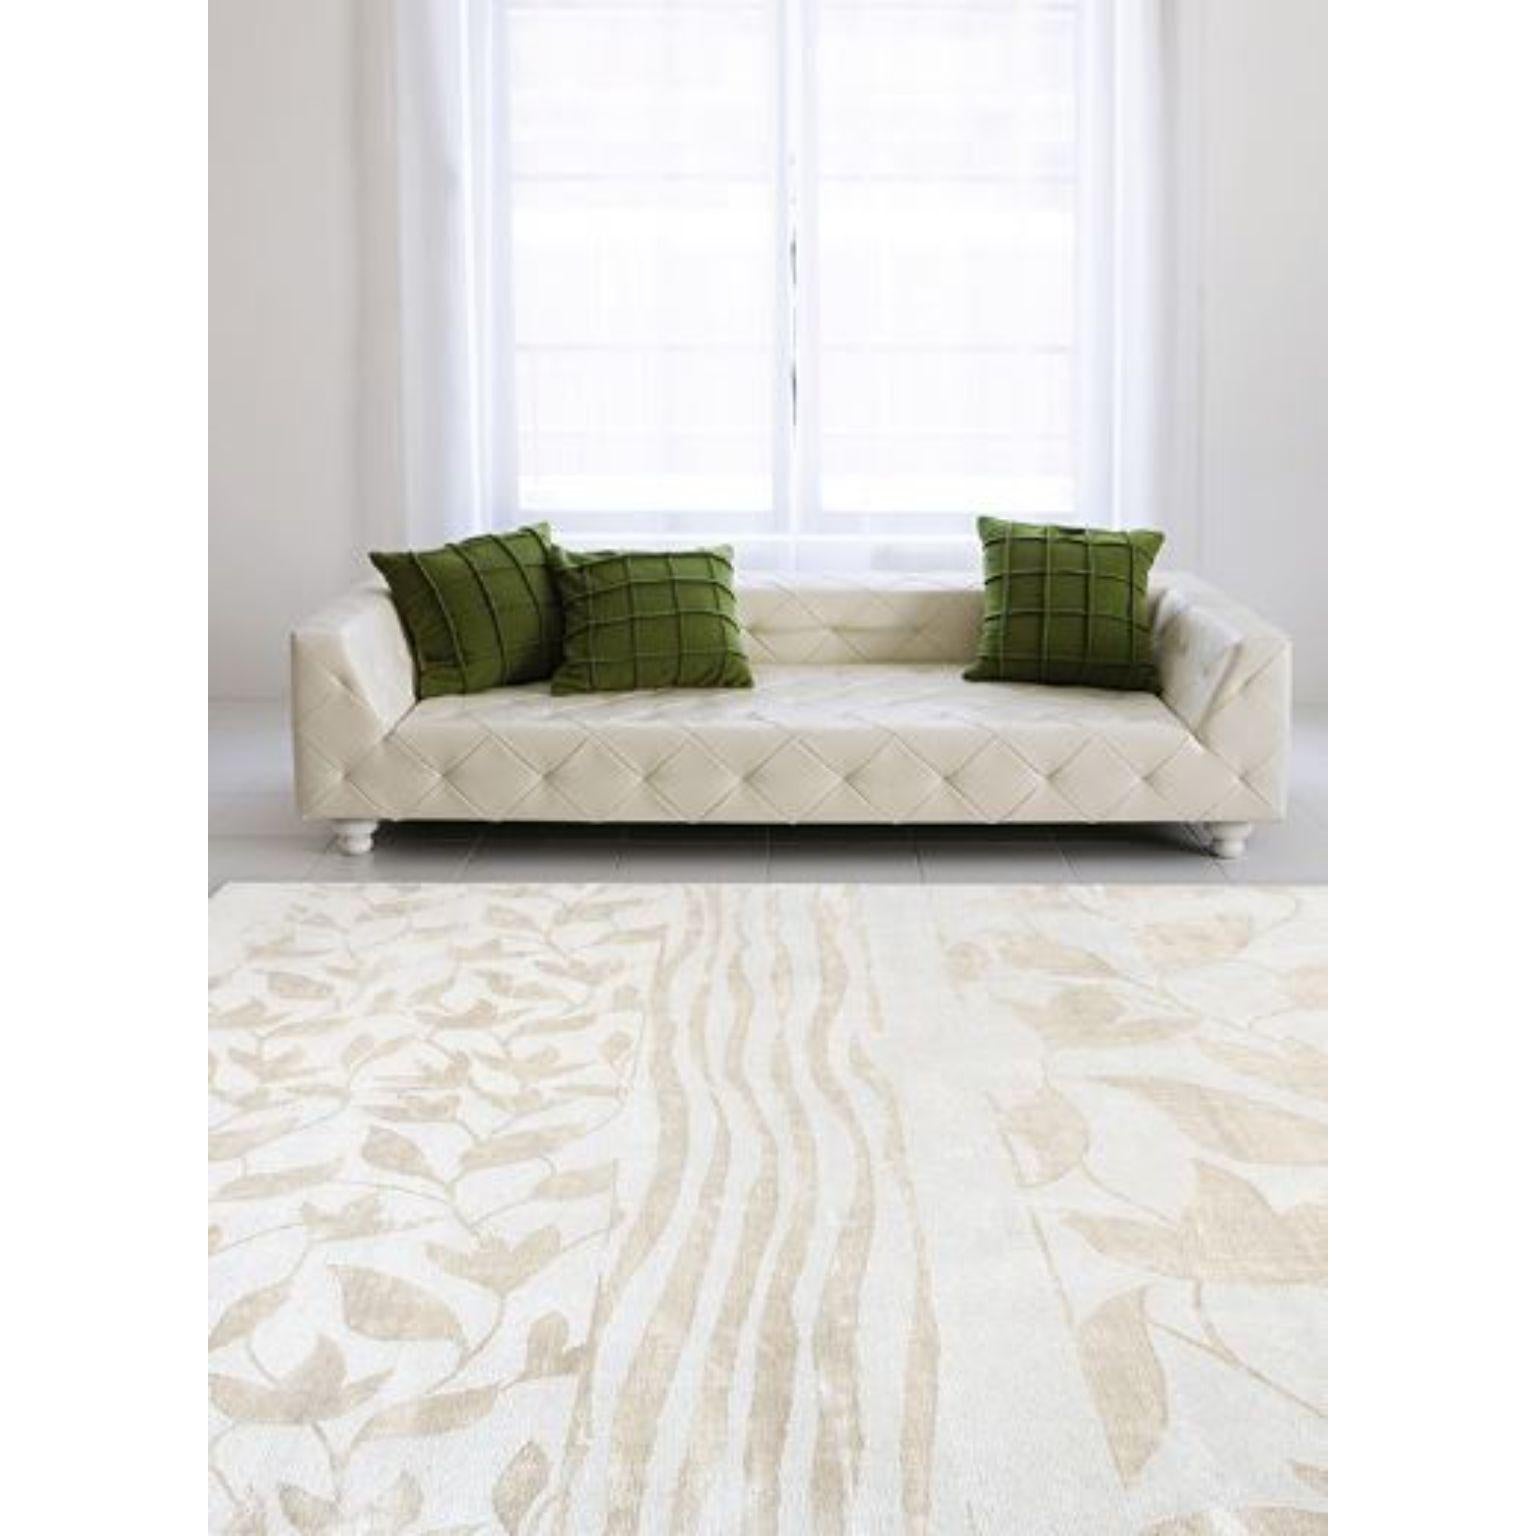 Wood Clem Clem 400 Rug by Illulian For Sale